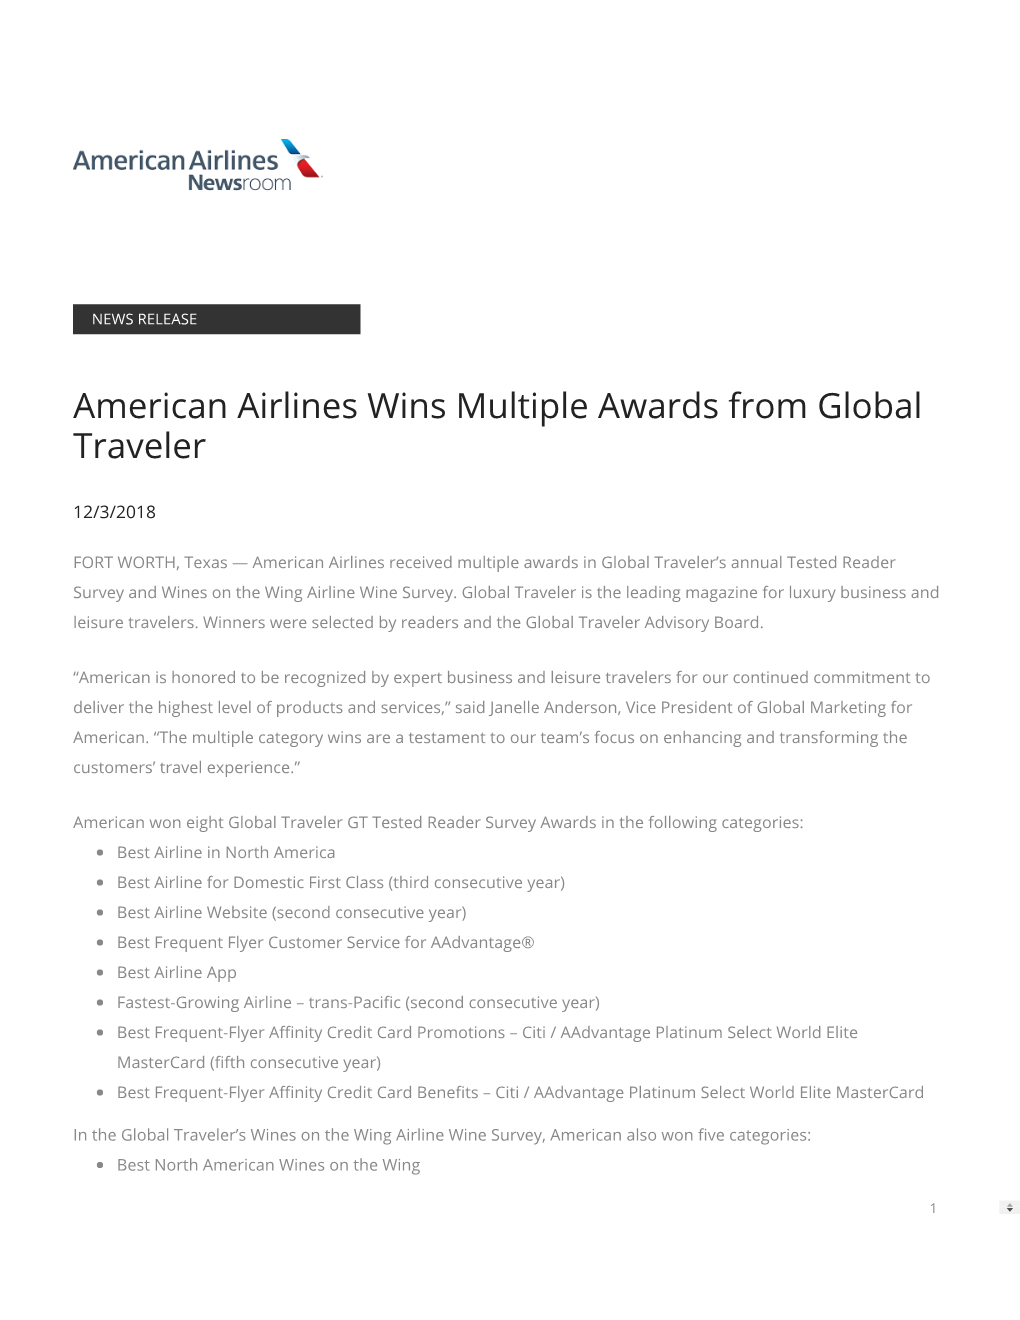 American Airlines Wins Multiple Awards from Global Traveler